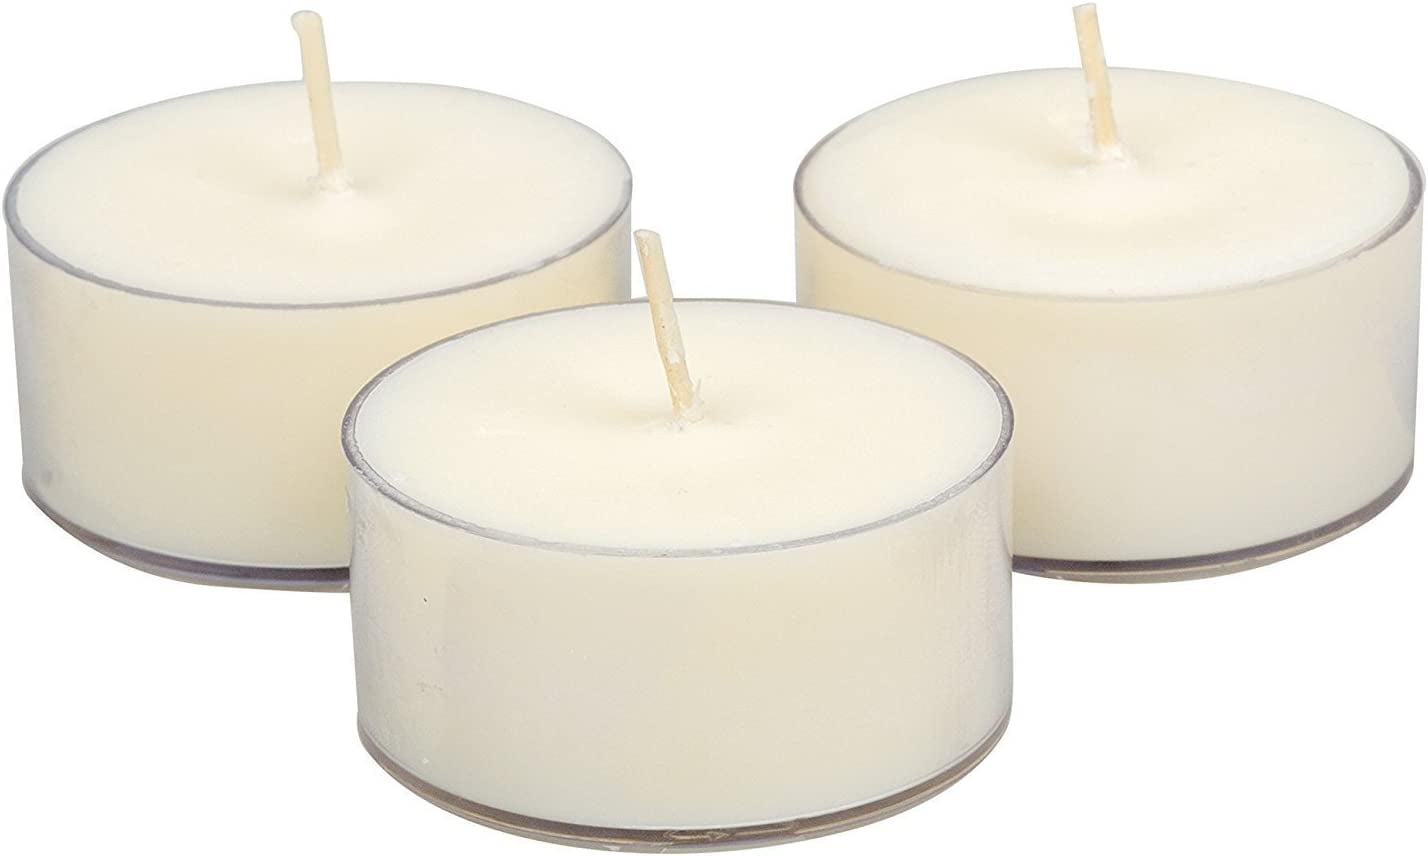 Soy Tealight Candles - 25 Unscented - All Natural Color - Clear Cup Candles With 6 To Hour Burn - Walmart.com